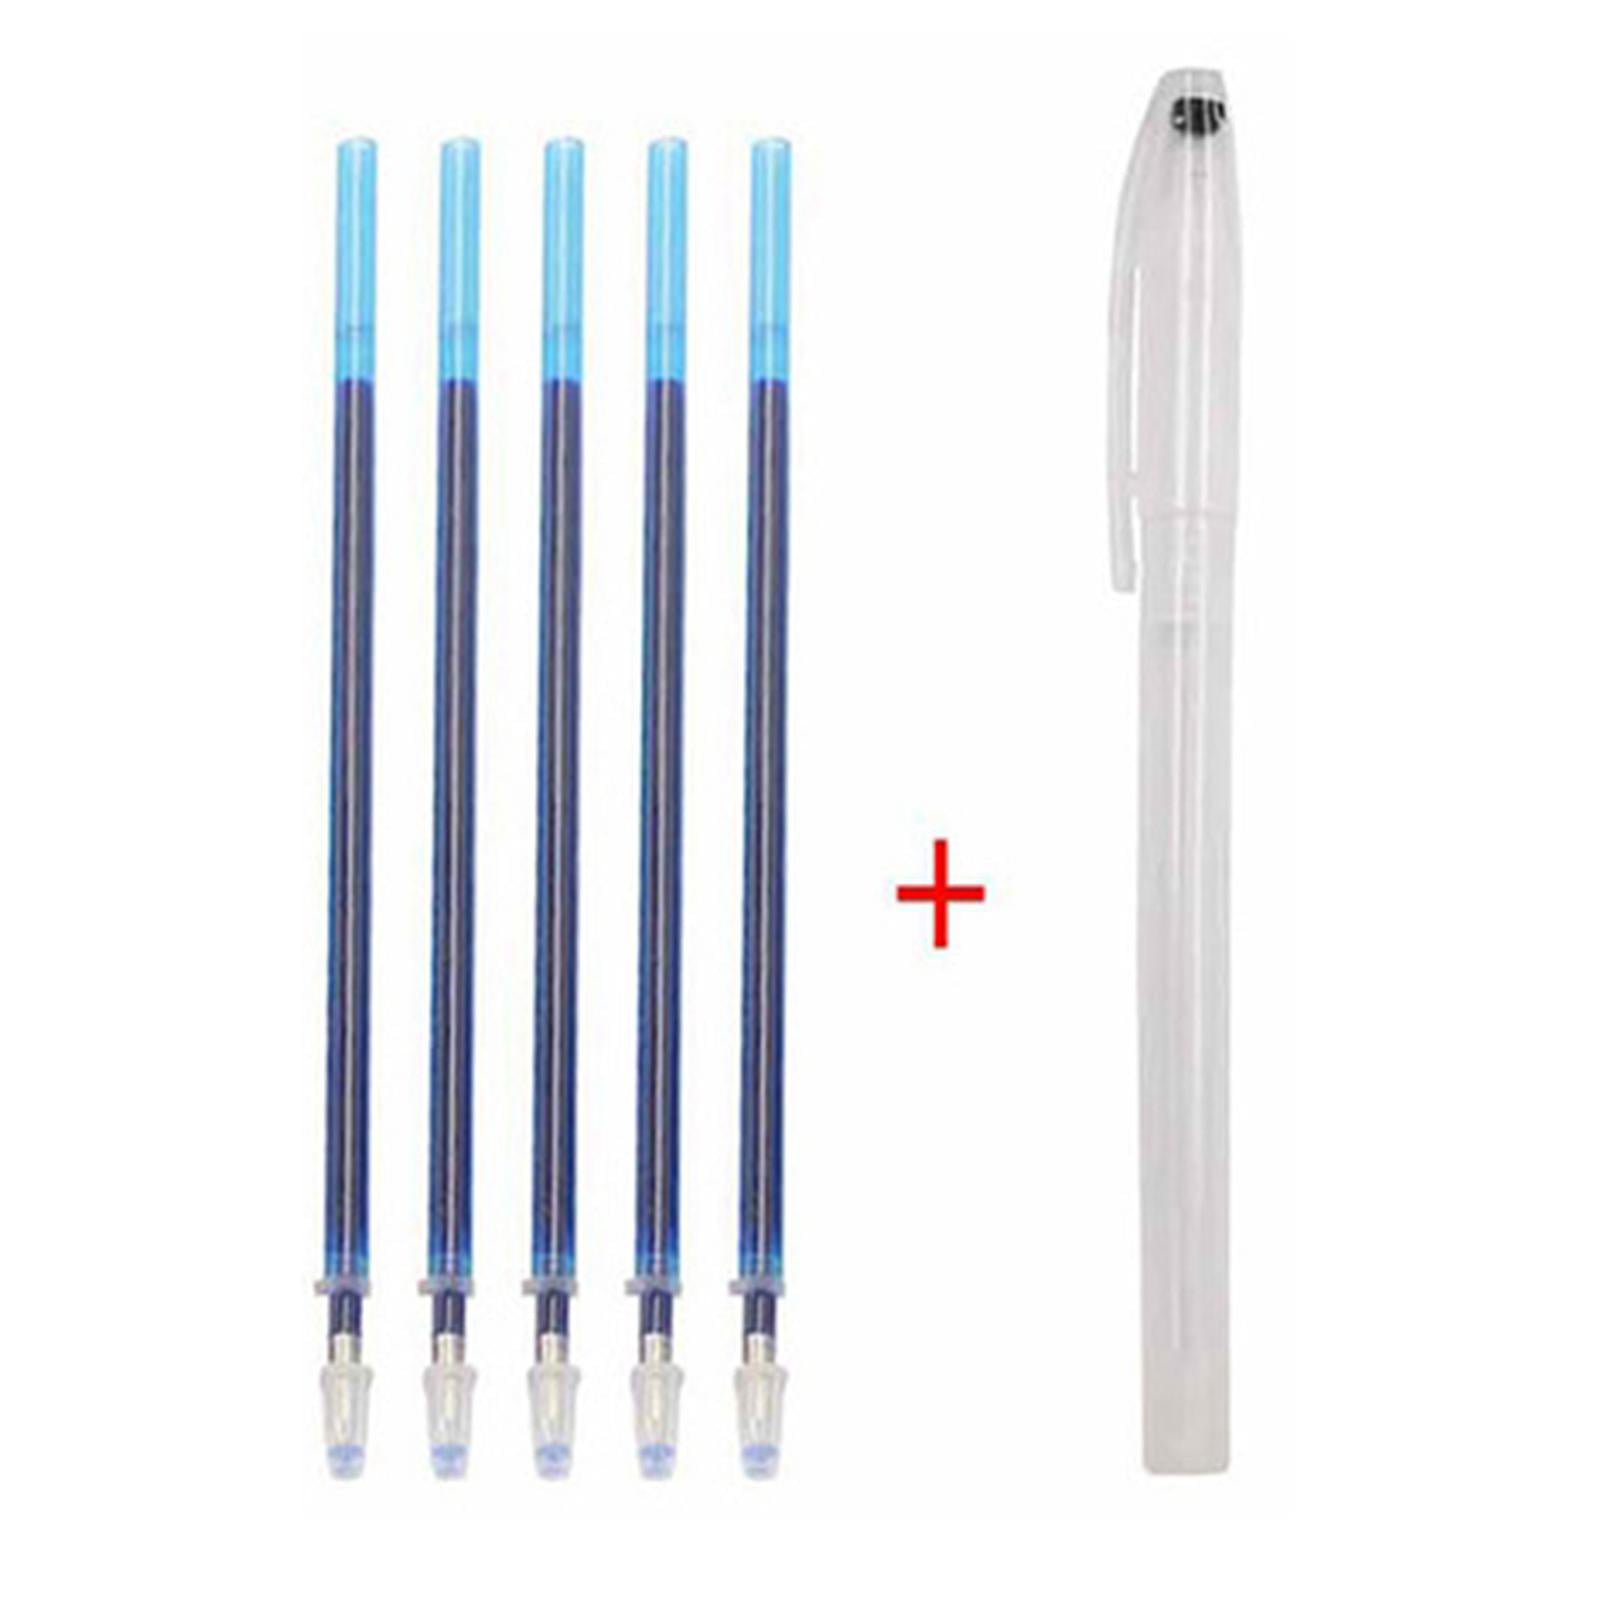  100 Sheets Carbon Paper White Graphite Paper Transfer Tracing  Paper and 5 Pieces Ball Embossing Styluses for Wood, Paper, Canvas and  Other Art Craft Surfaces (White-100)